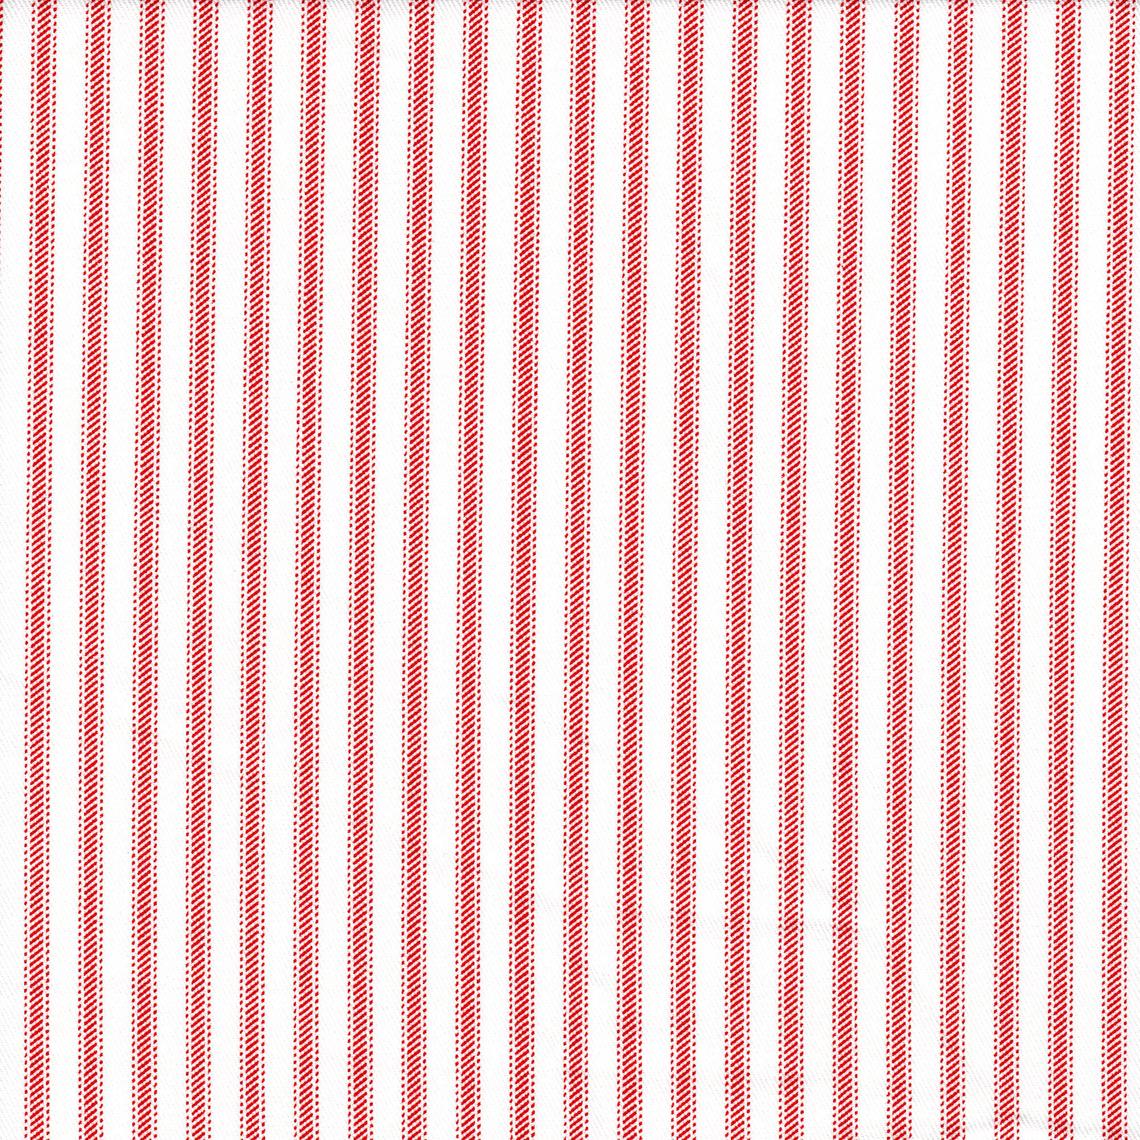 tailored tier cafe curtain panels pair in classic lipstick red ticking stripe on white